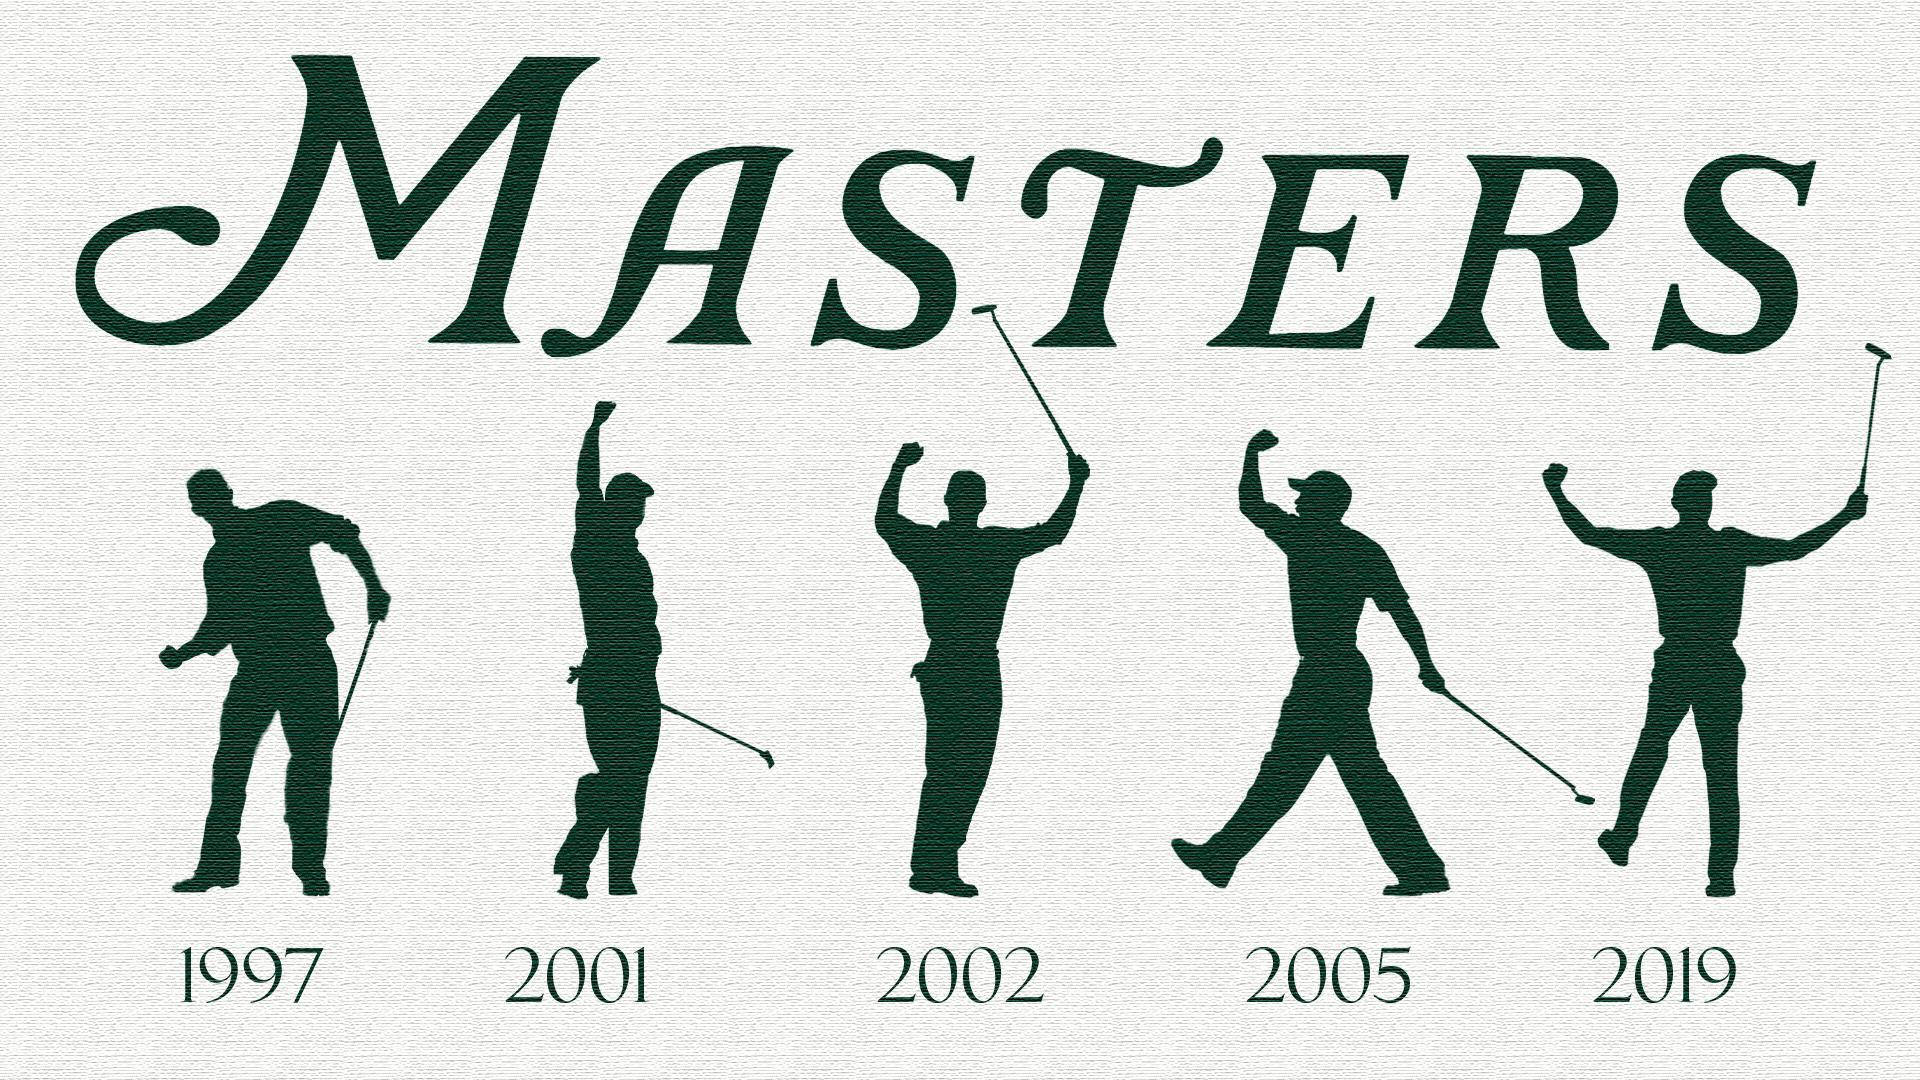 Tiger Woods Masters Victories Background